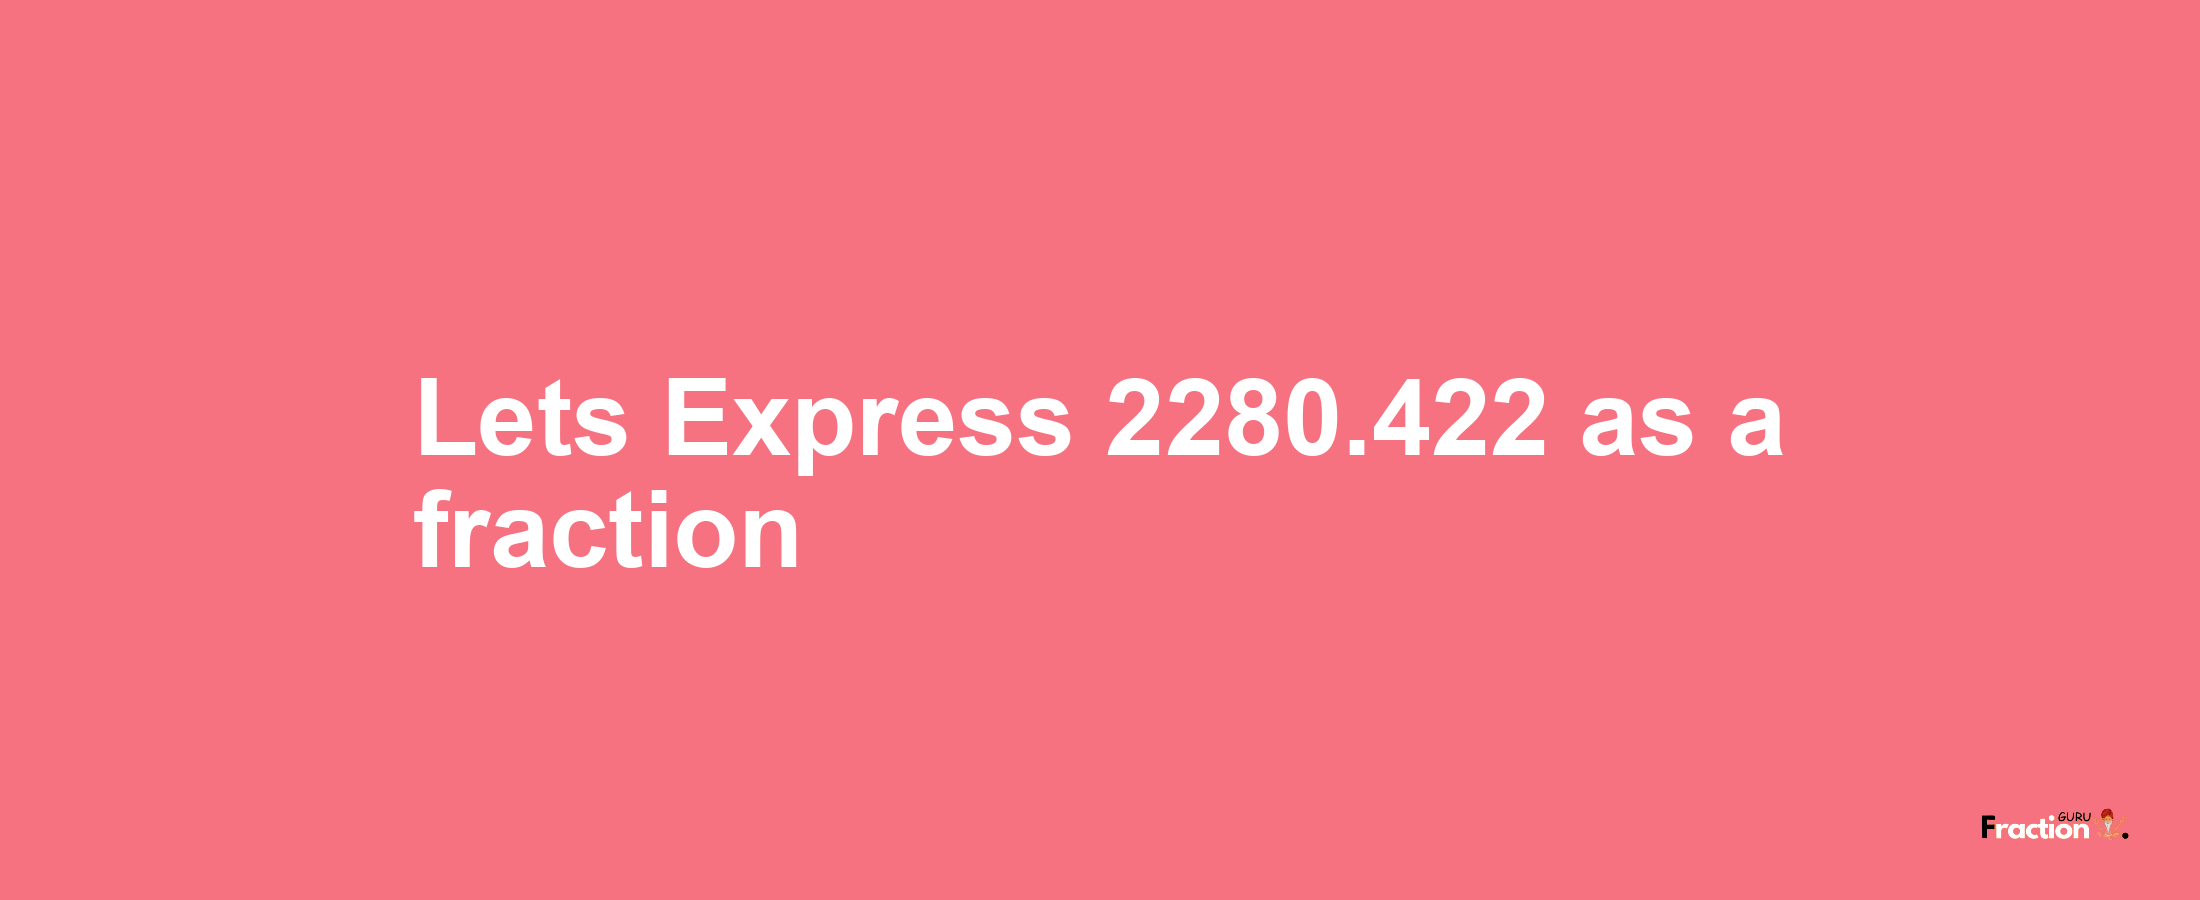 Lets Express 2280.422 as afraction